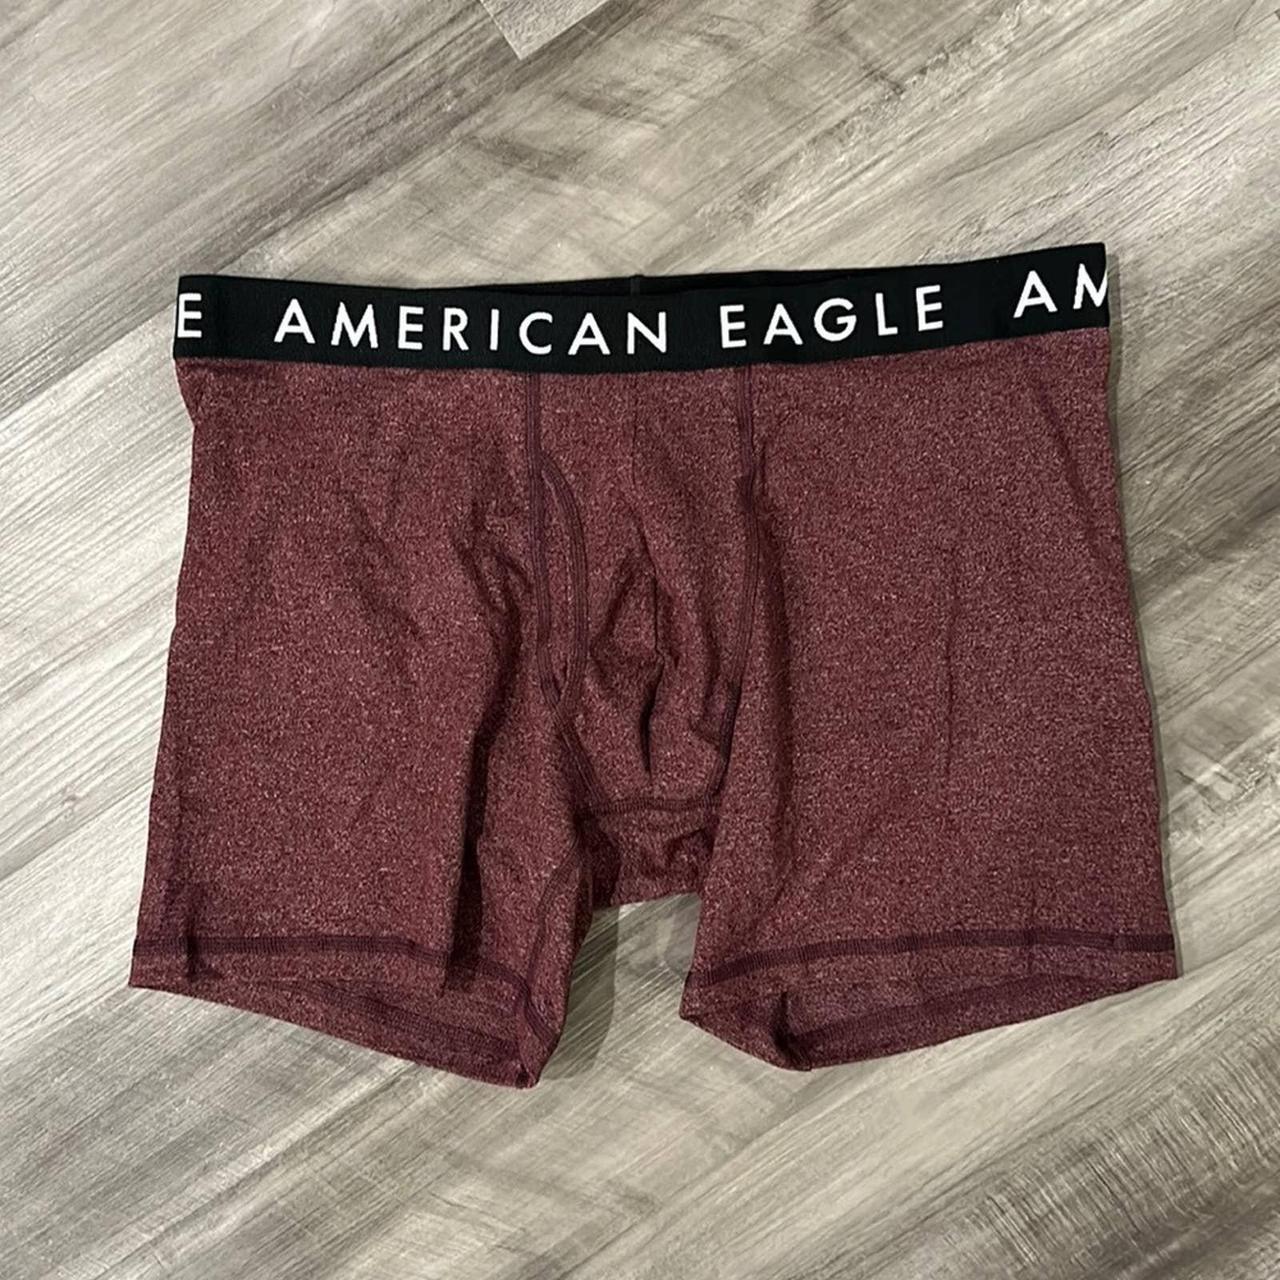 American Eagle Outfitters Briefs And Trunks - Buy American Eagle